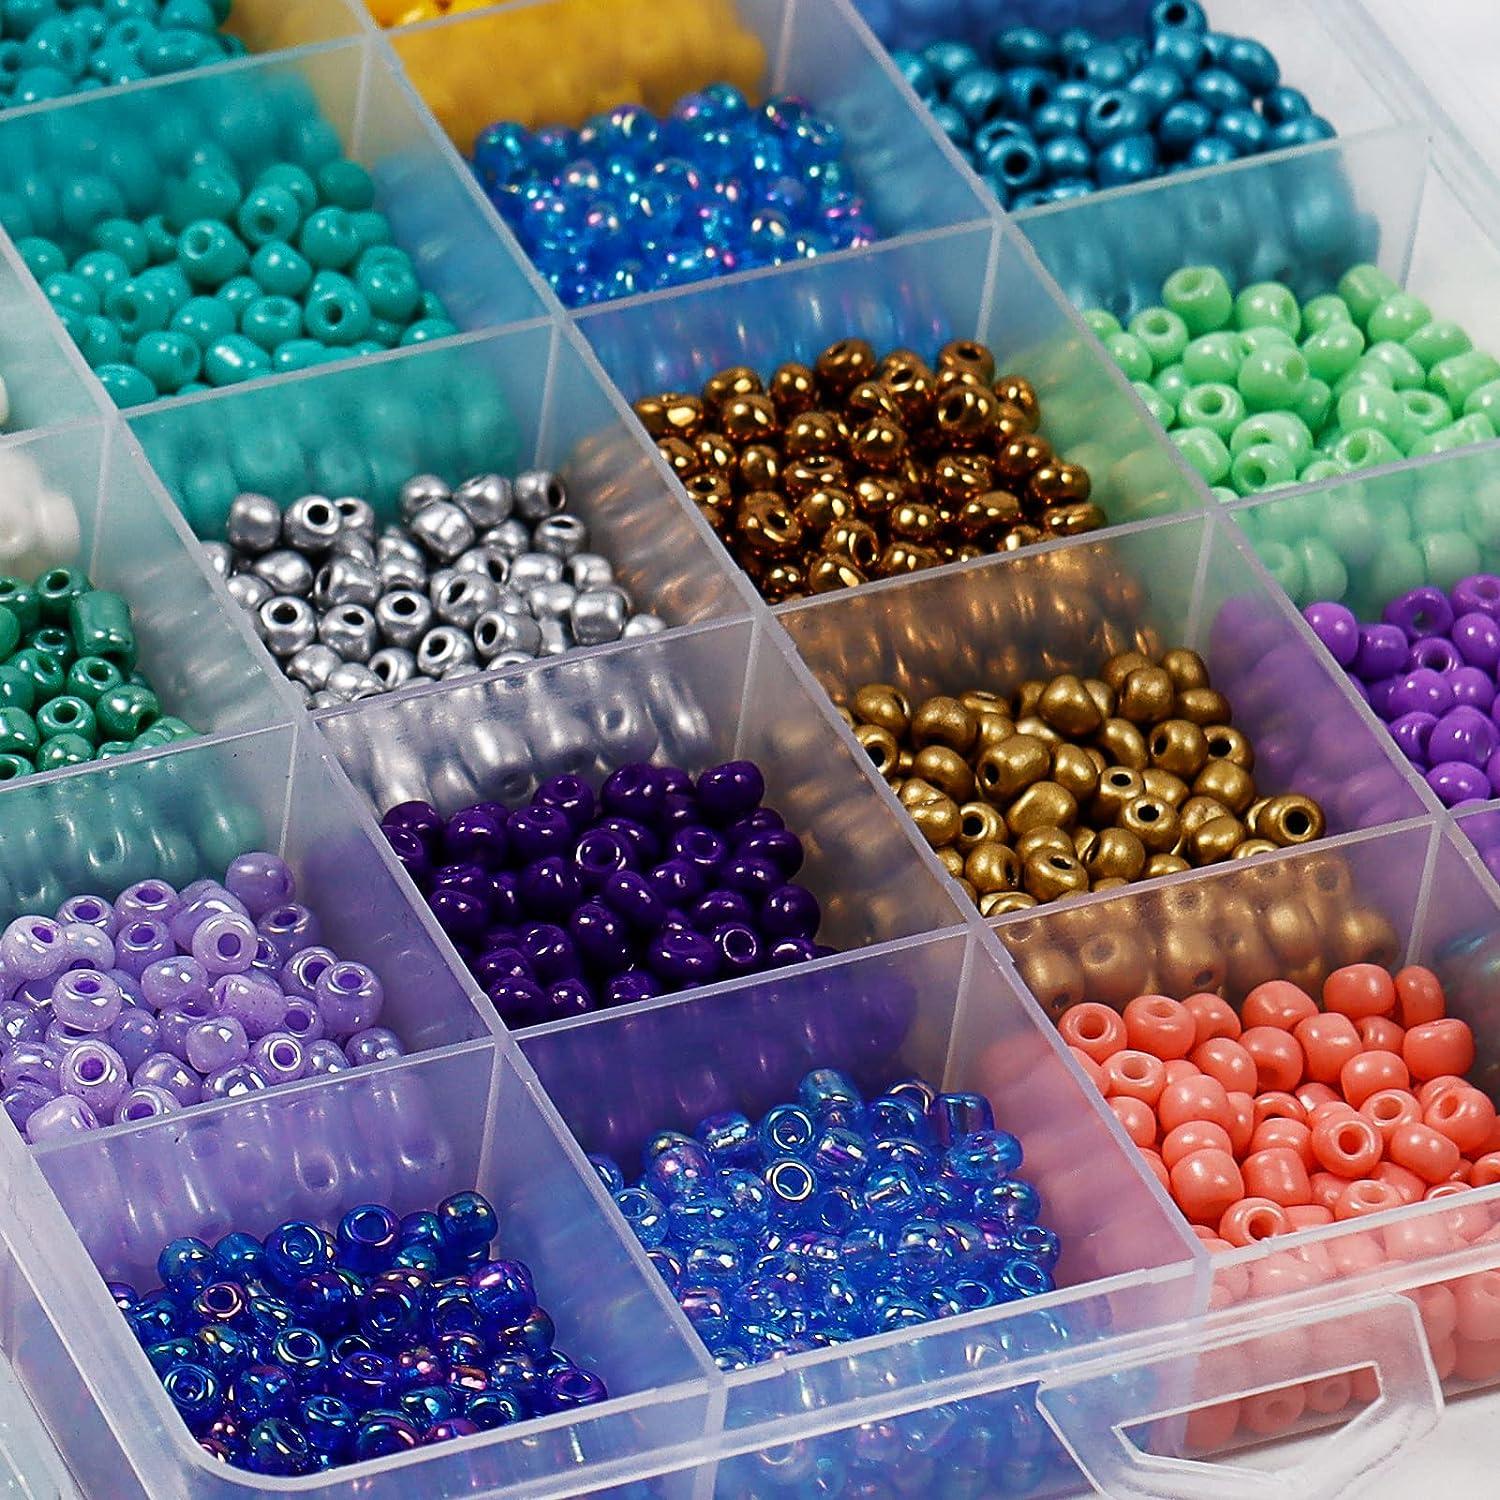 Fieldoo Feildoo Glass Seed Beads, Bracelet Beads Set, Assorted Glass Beads with 7 Grid Plastic Storage Box, Small Round Beads for Jewelry Making, L#003 Beads